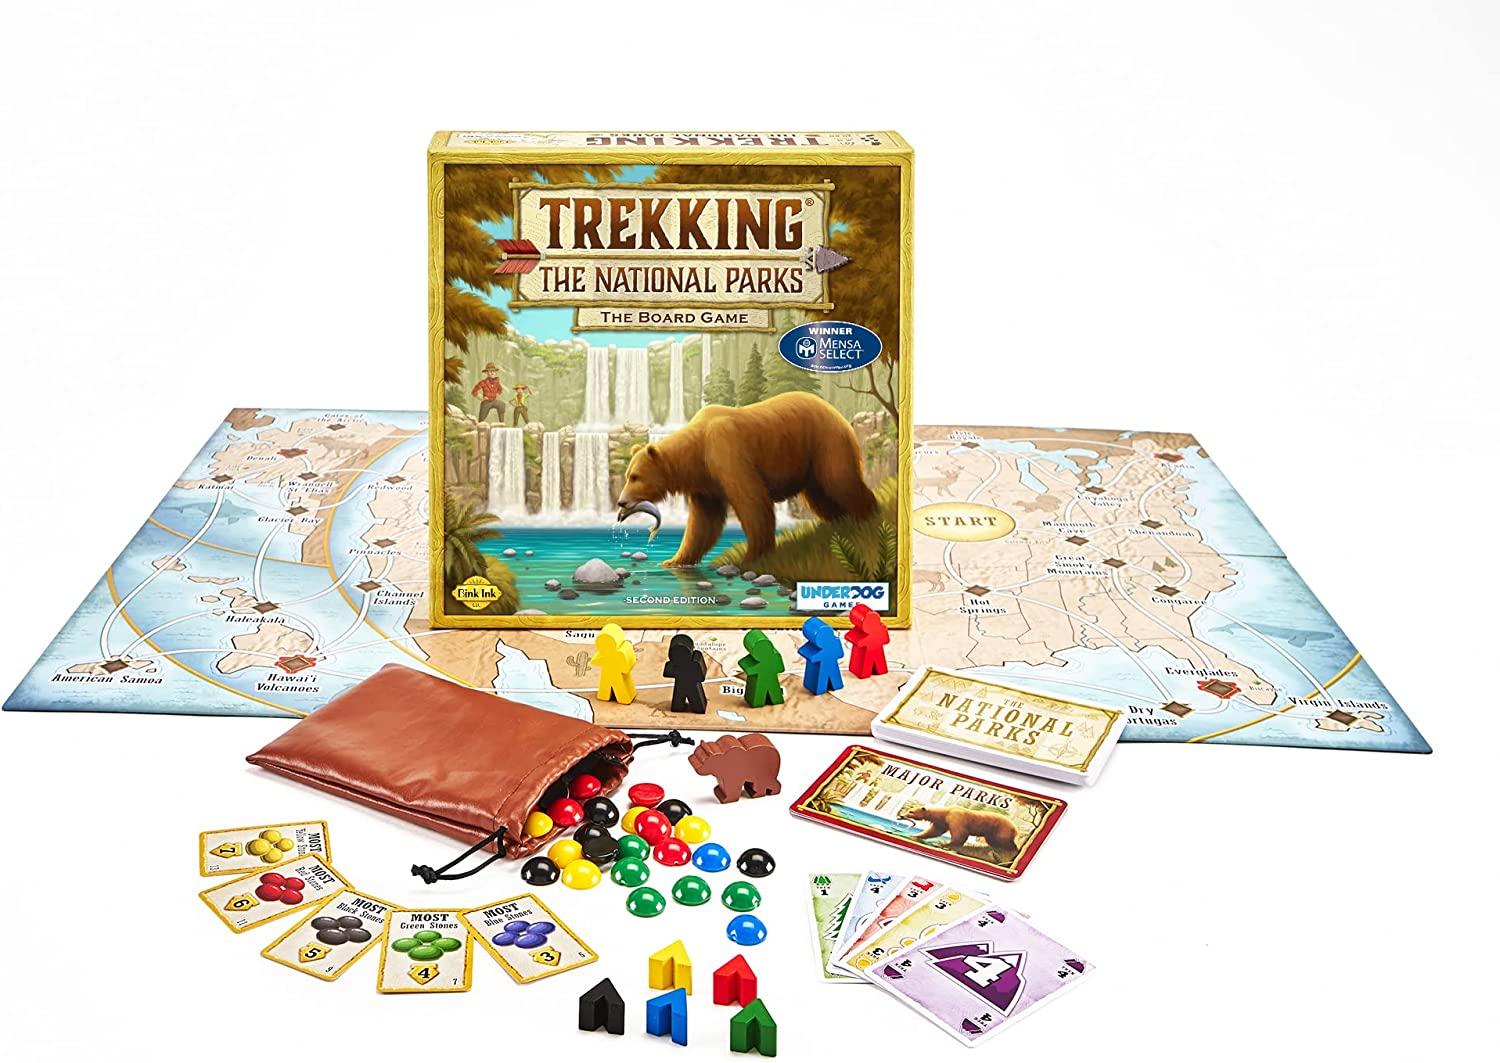 Trekking the National Parks board game with pieces and cards displayed